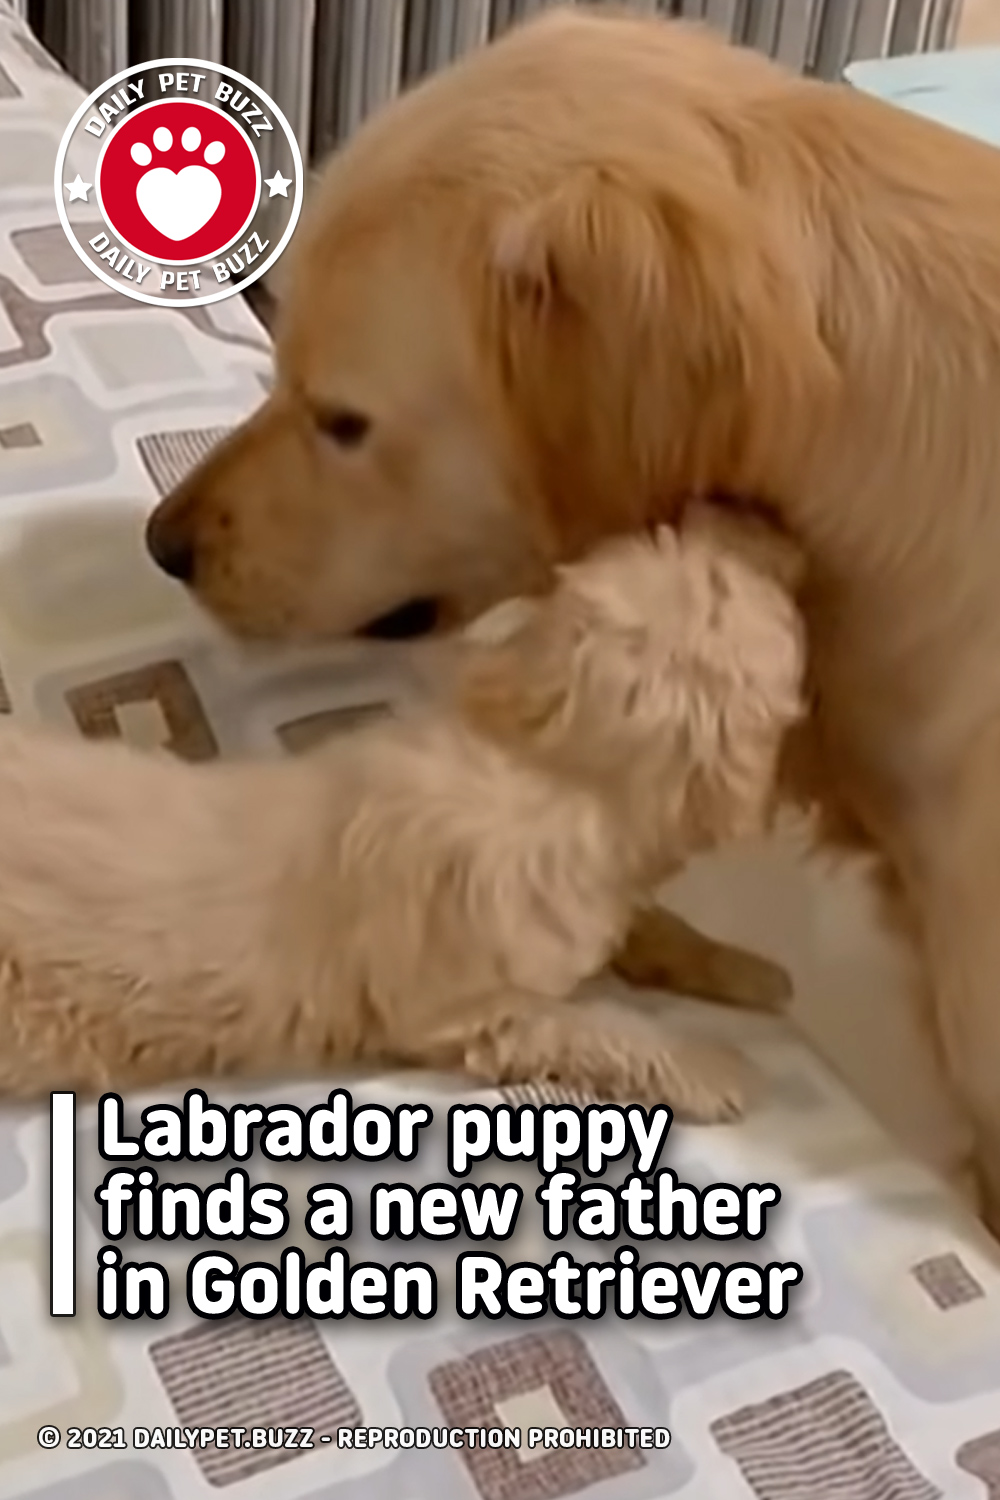 Labrador puppy finds a new father in Golden Retriever